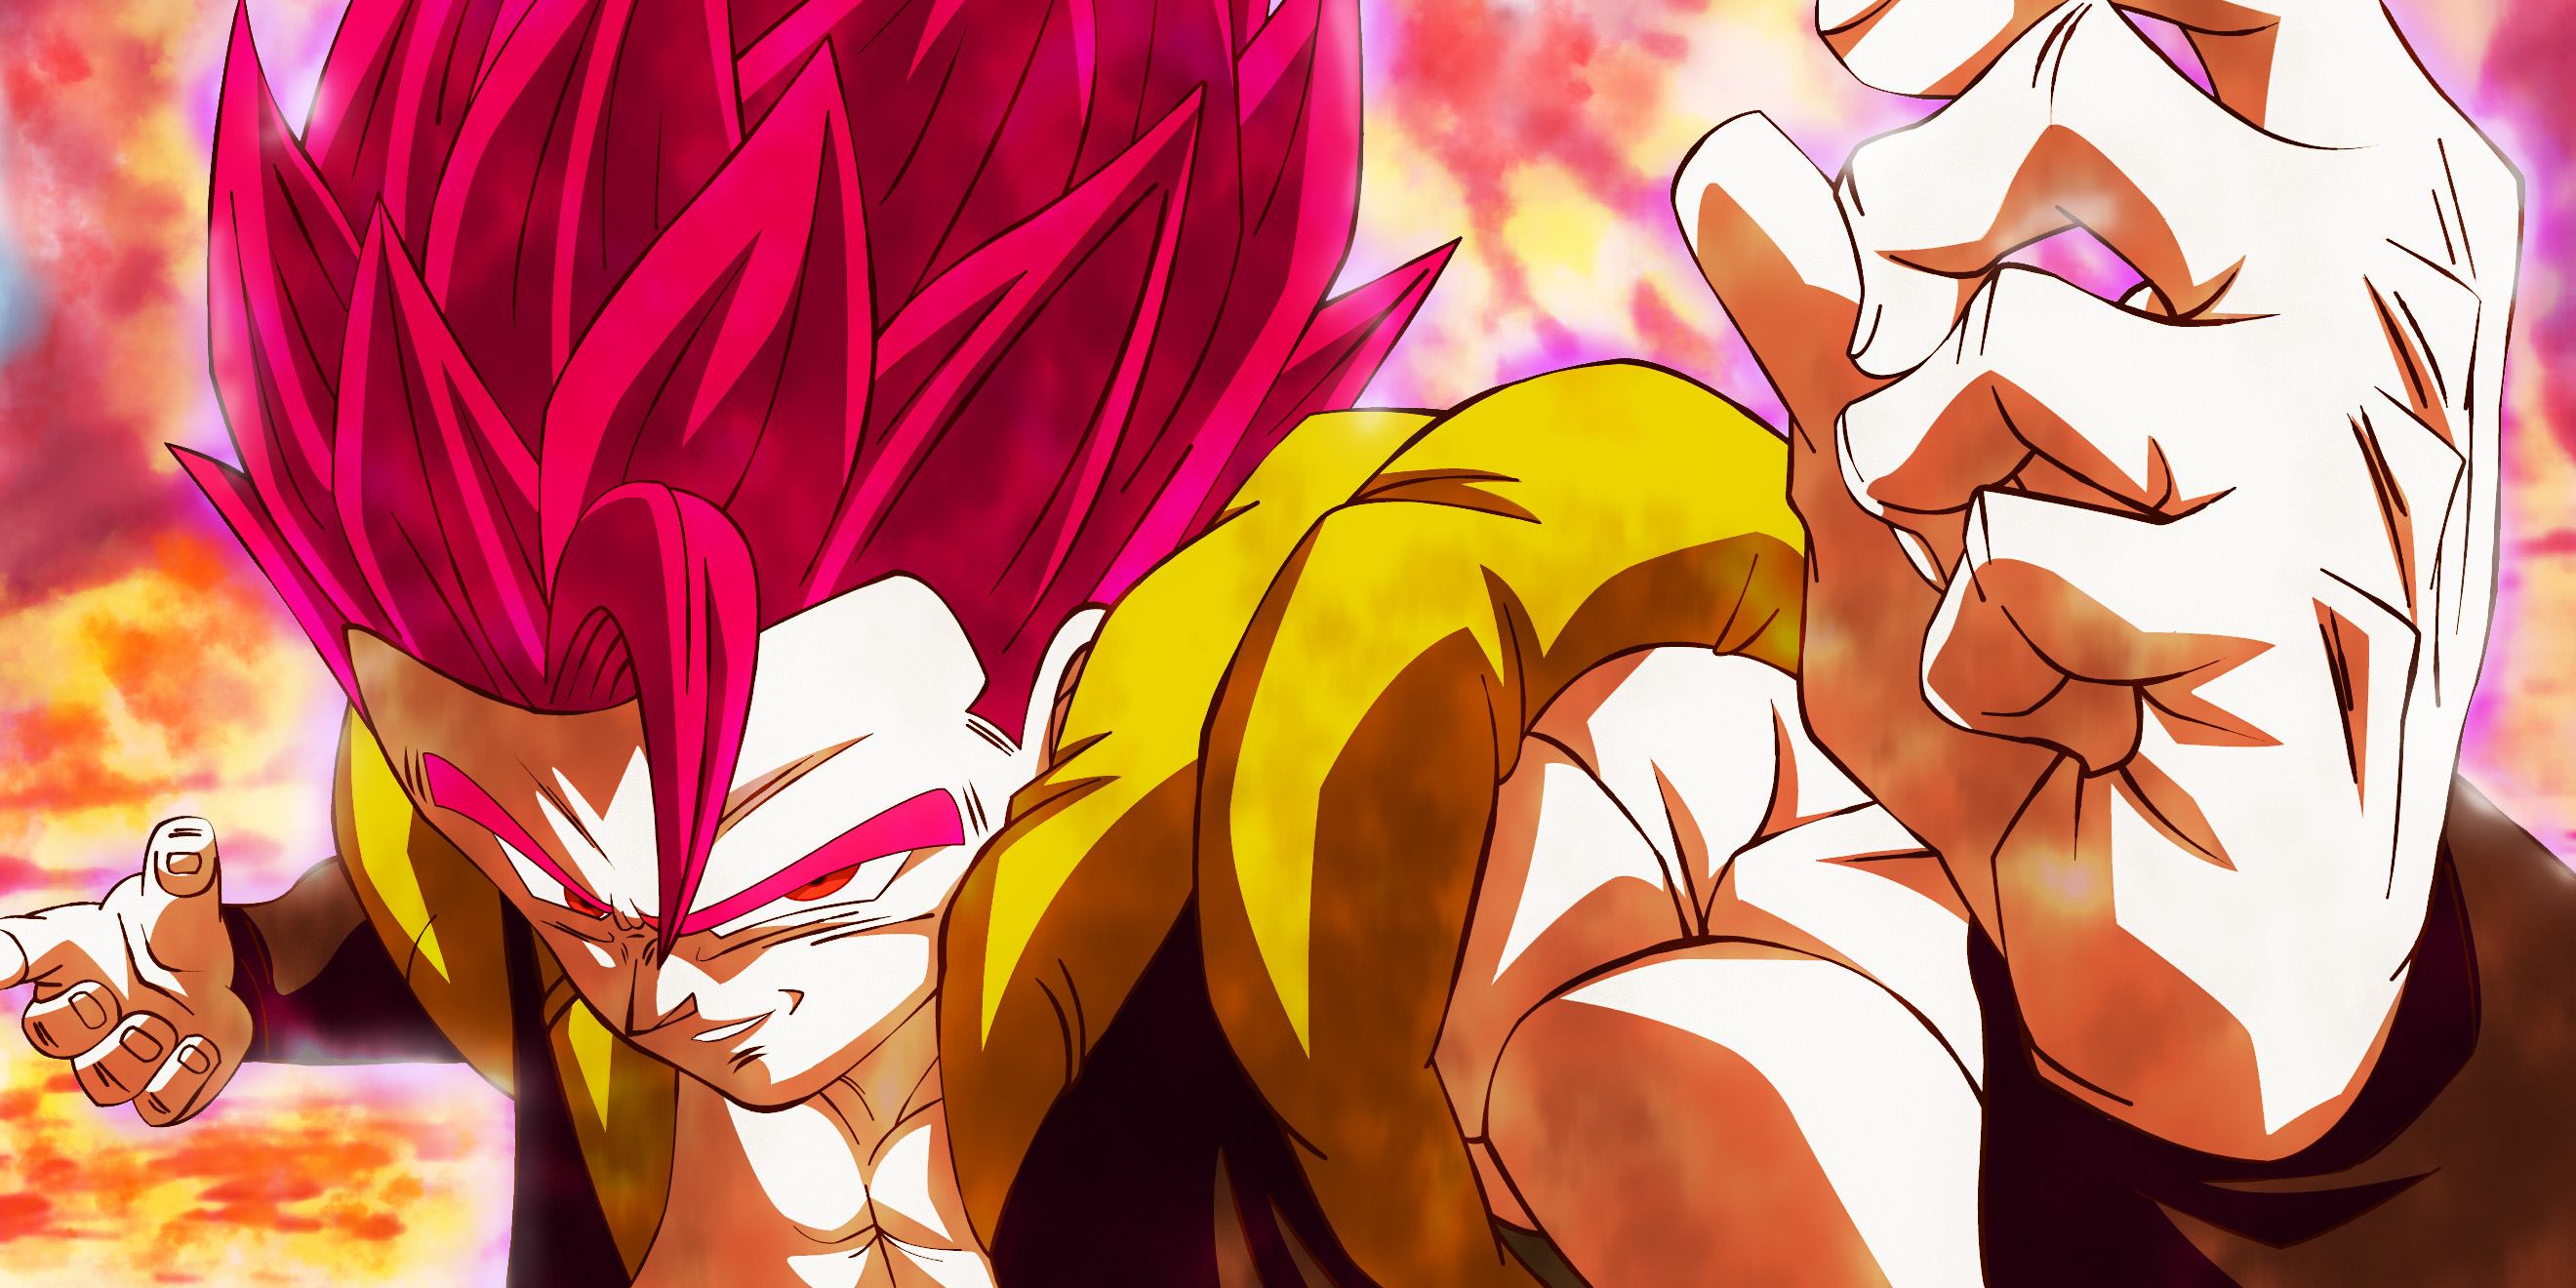 Gogeta SSG by MohaSetif